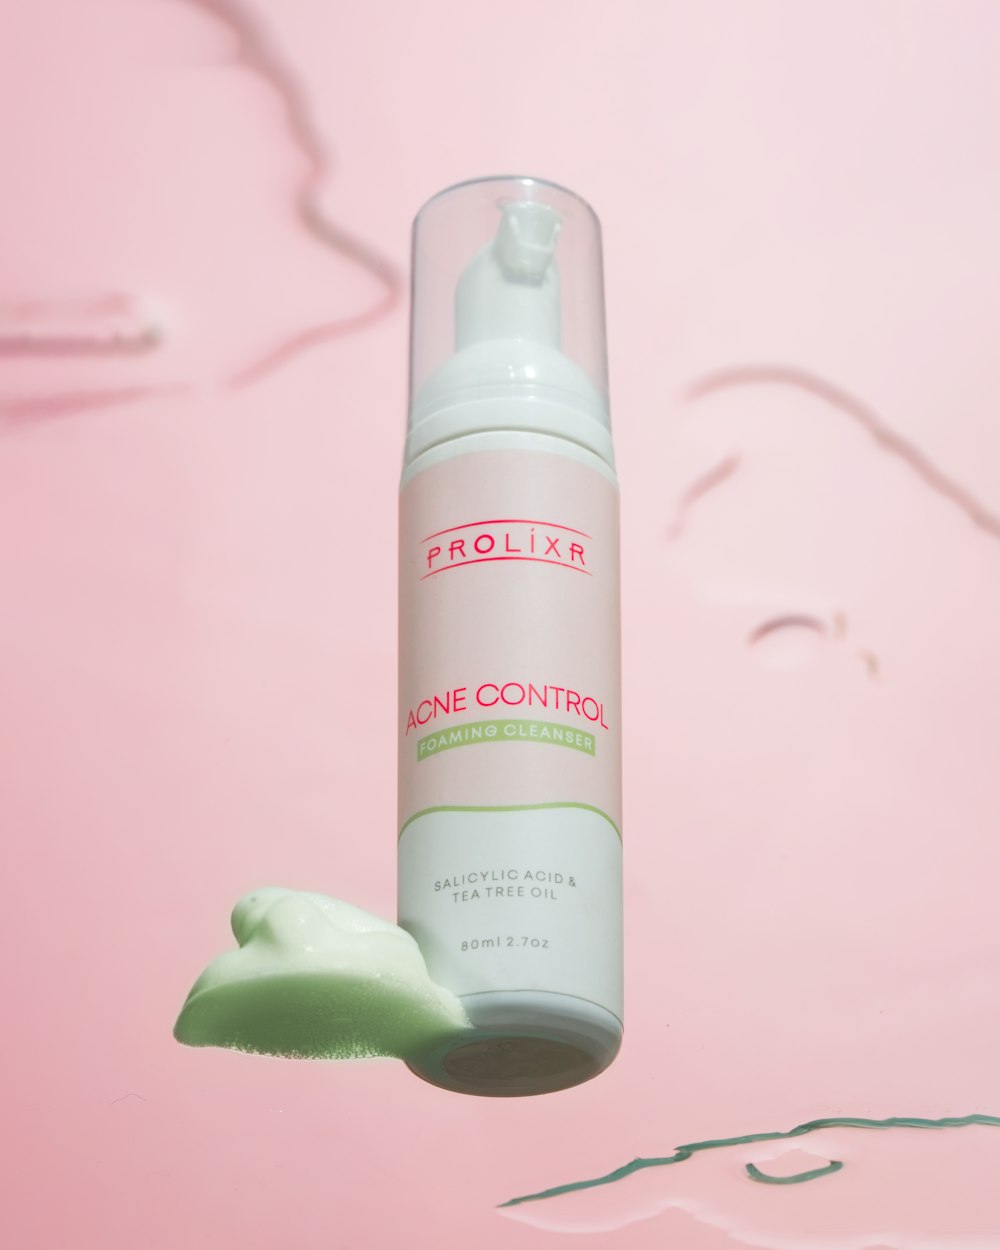 a close up of a bottle of lotion on a pink background